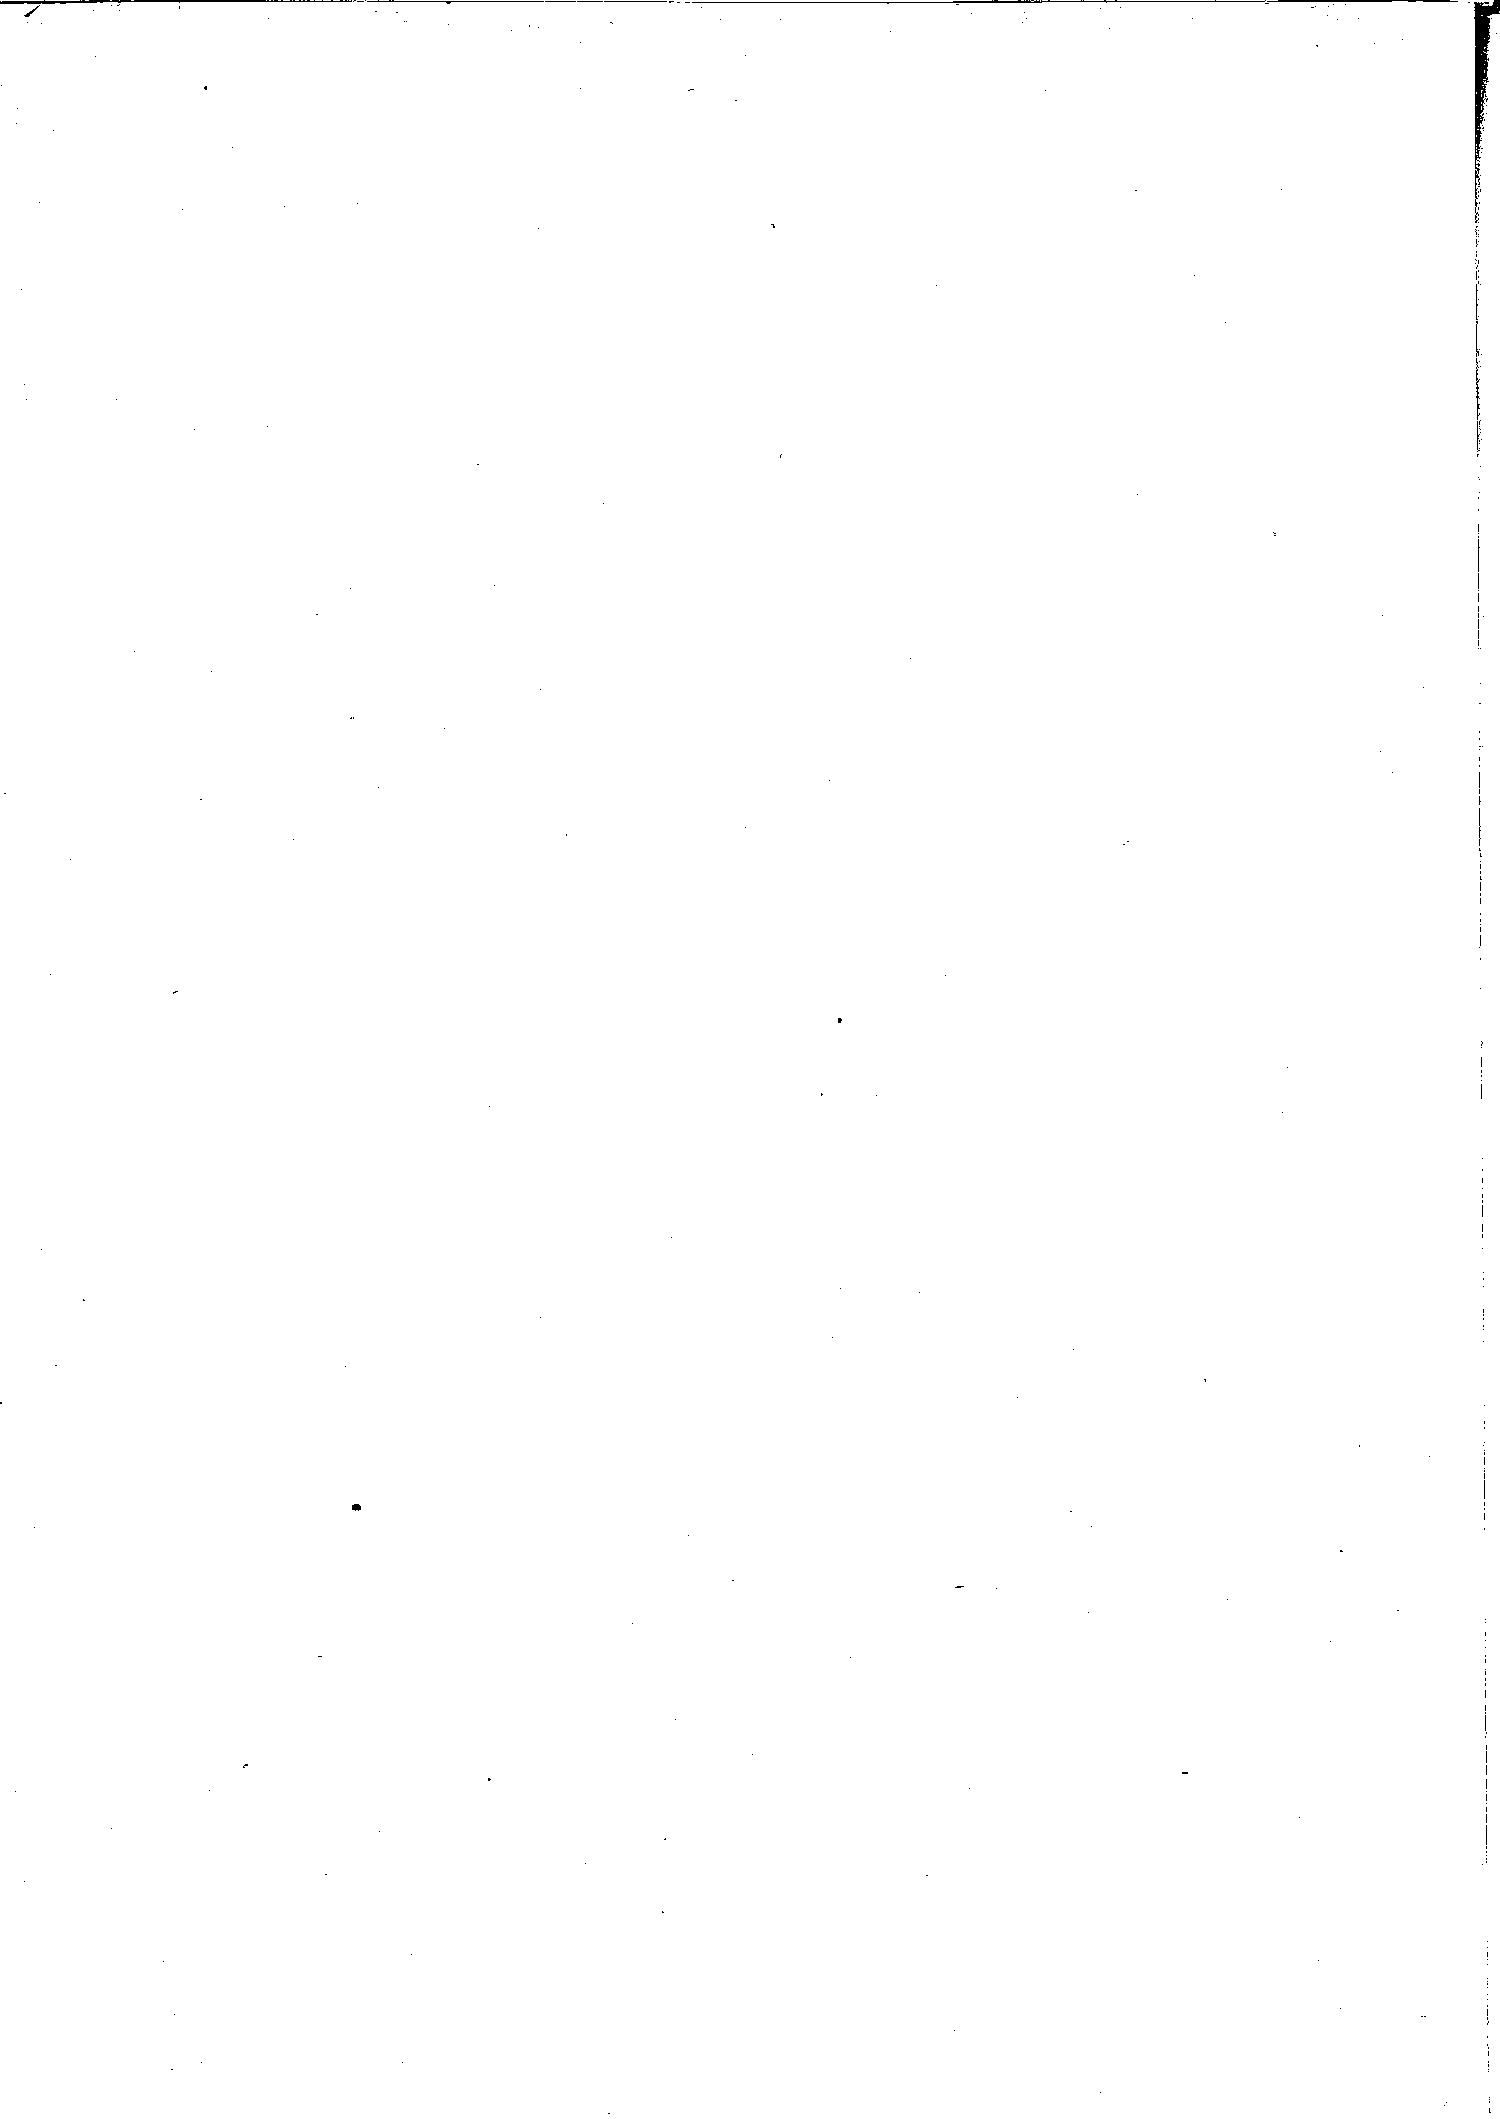 Scan of page 436